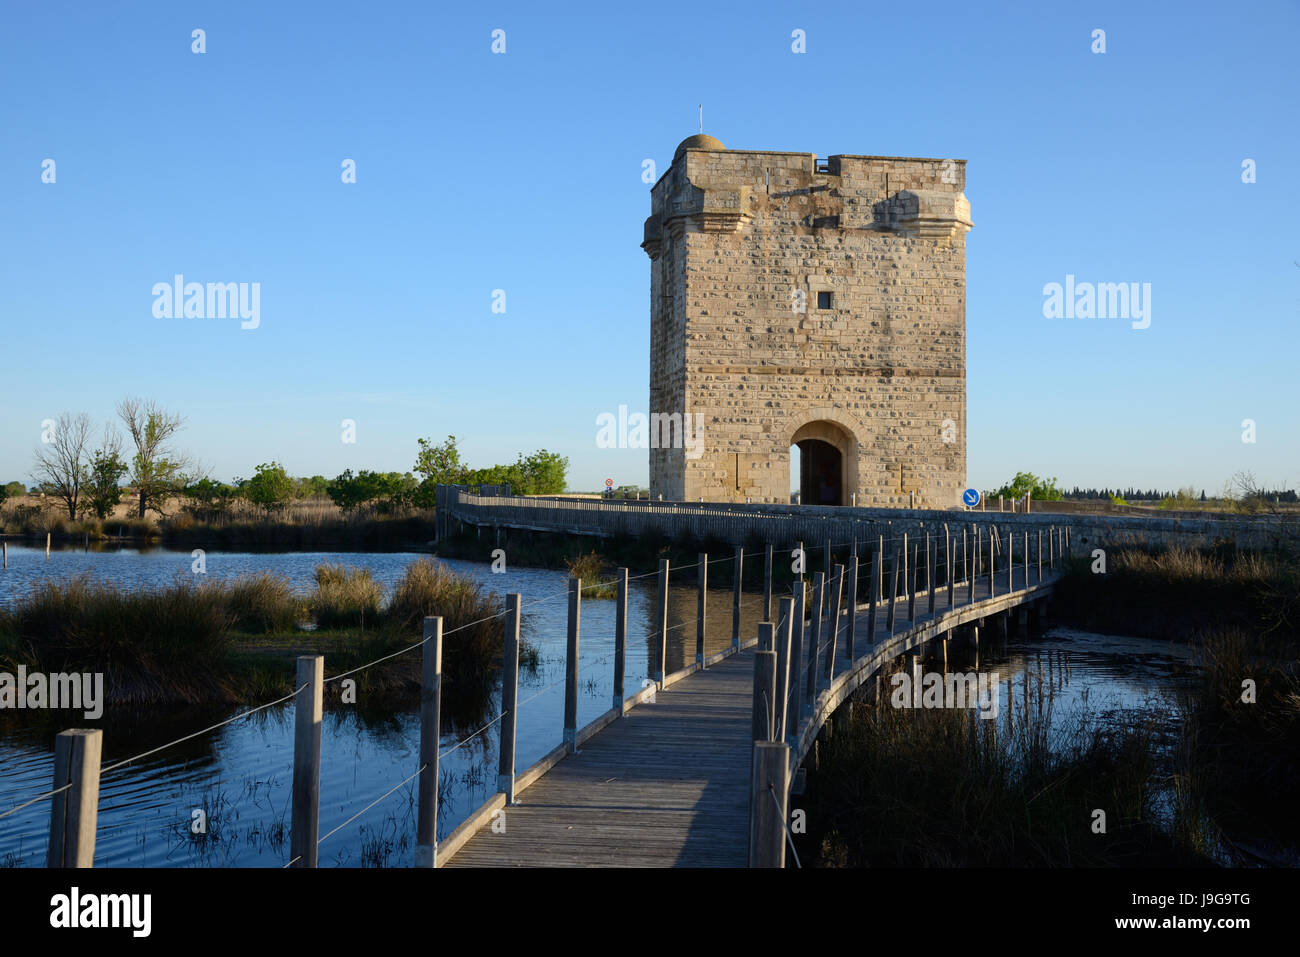 Wooden Boardwalk and the Medieval Tour Carbonnière or Carbonnière Tower (c13th) which Protected the Northern Approach to Walled City of Aigues-Mortes Stock Photo